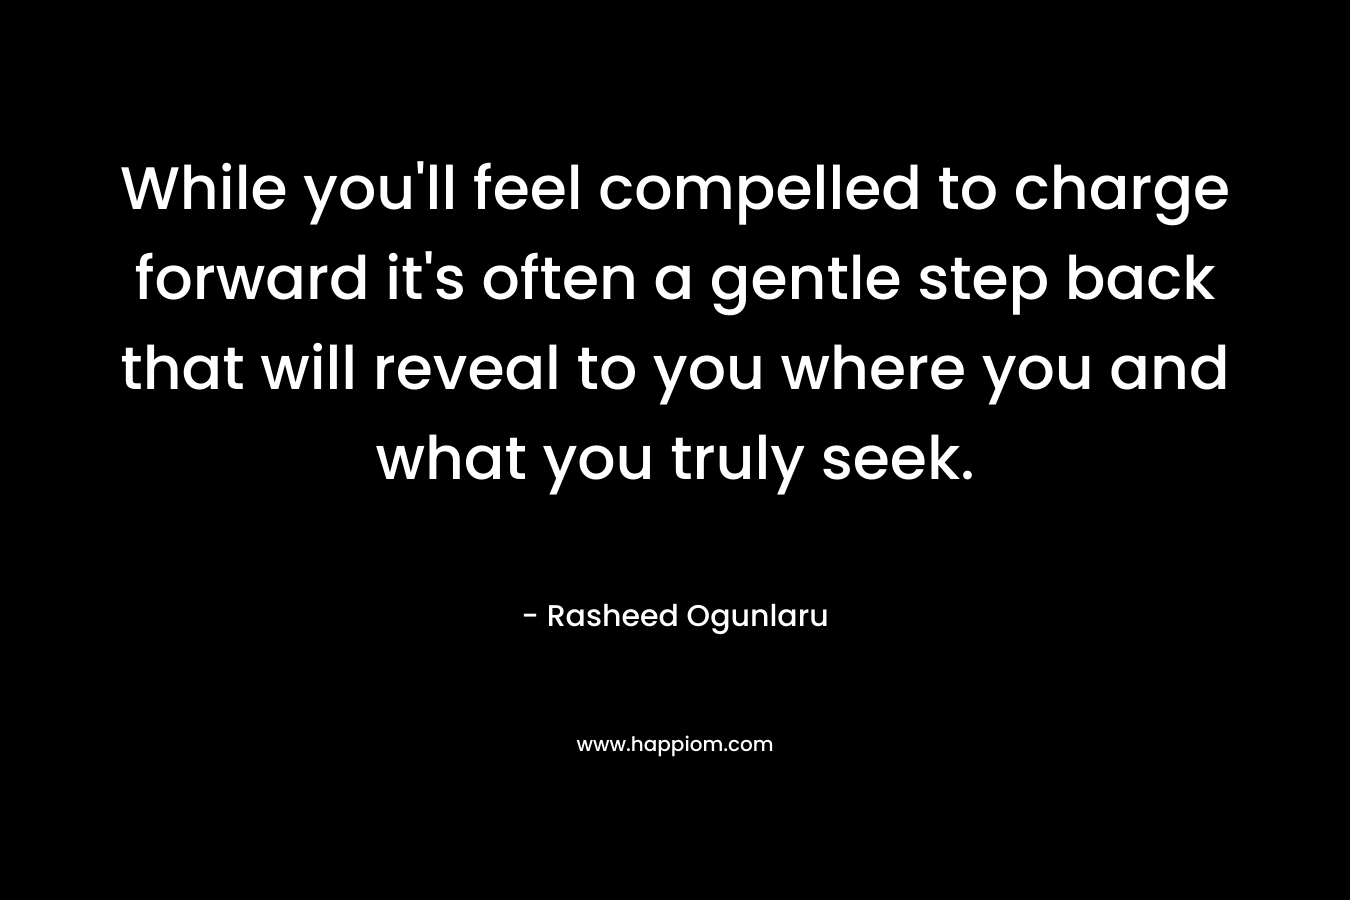 While you’ll feel compelled to charge forward it’s often a gentle step back that will reveal to you where you and what you truly seek. – Rasheed Ogunlaru